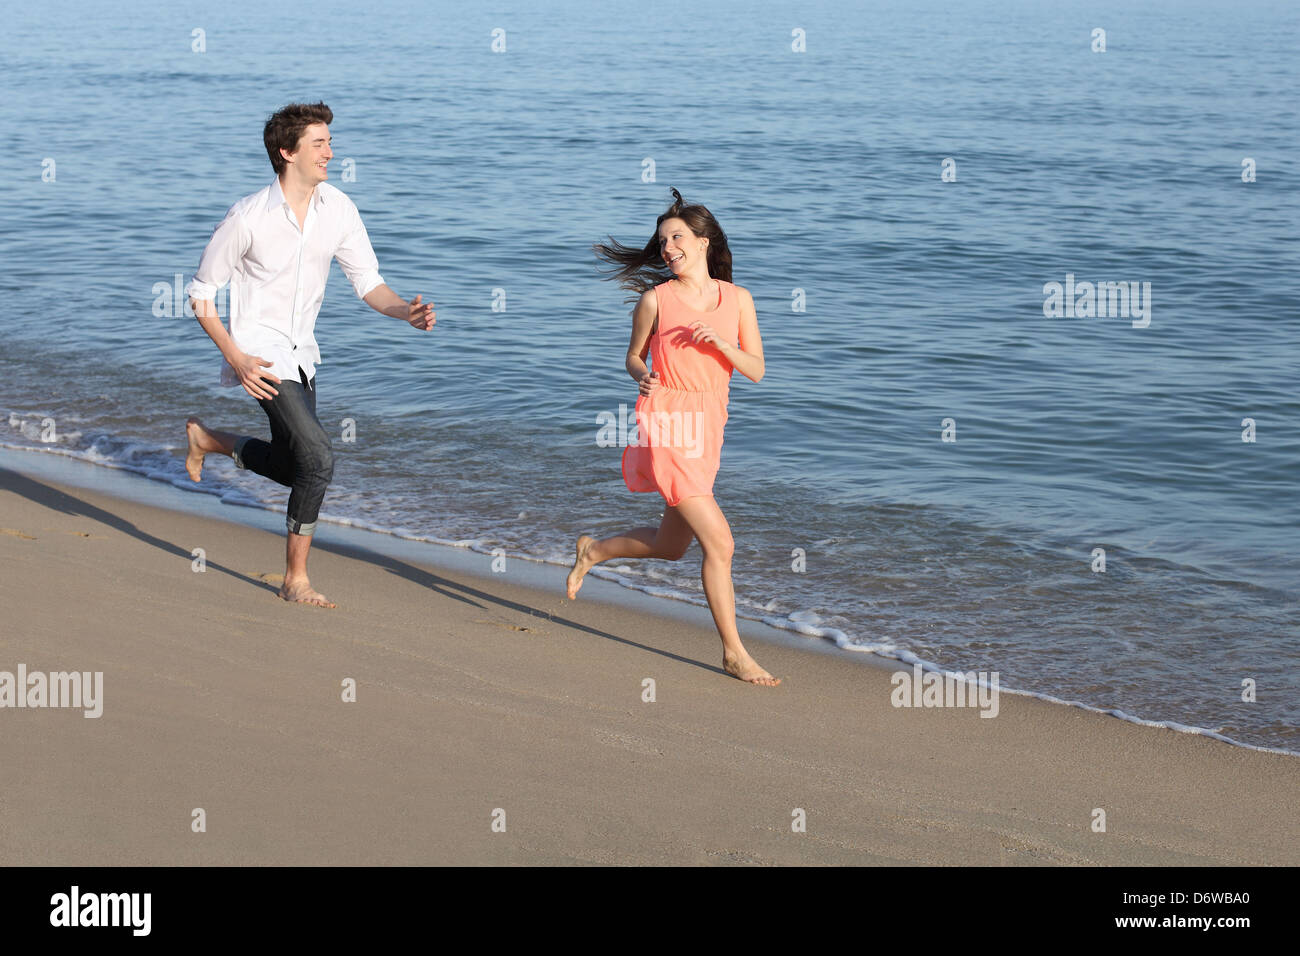 Couple of teenagers running and flirting on the beach shore near the water Stock Photo